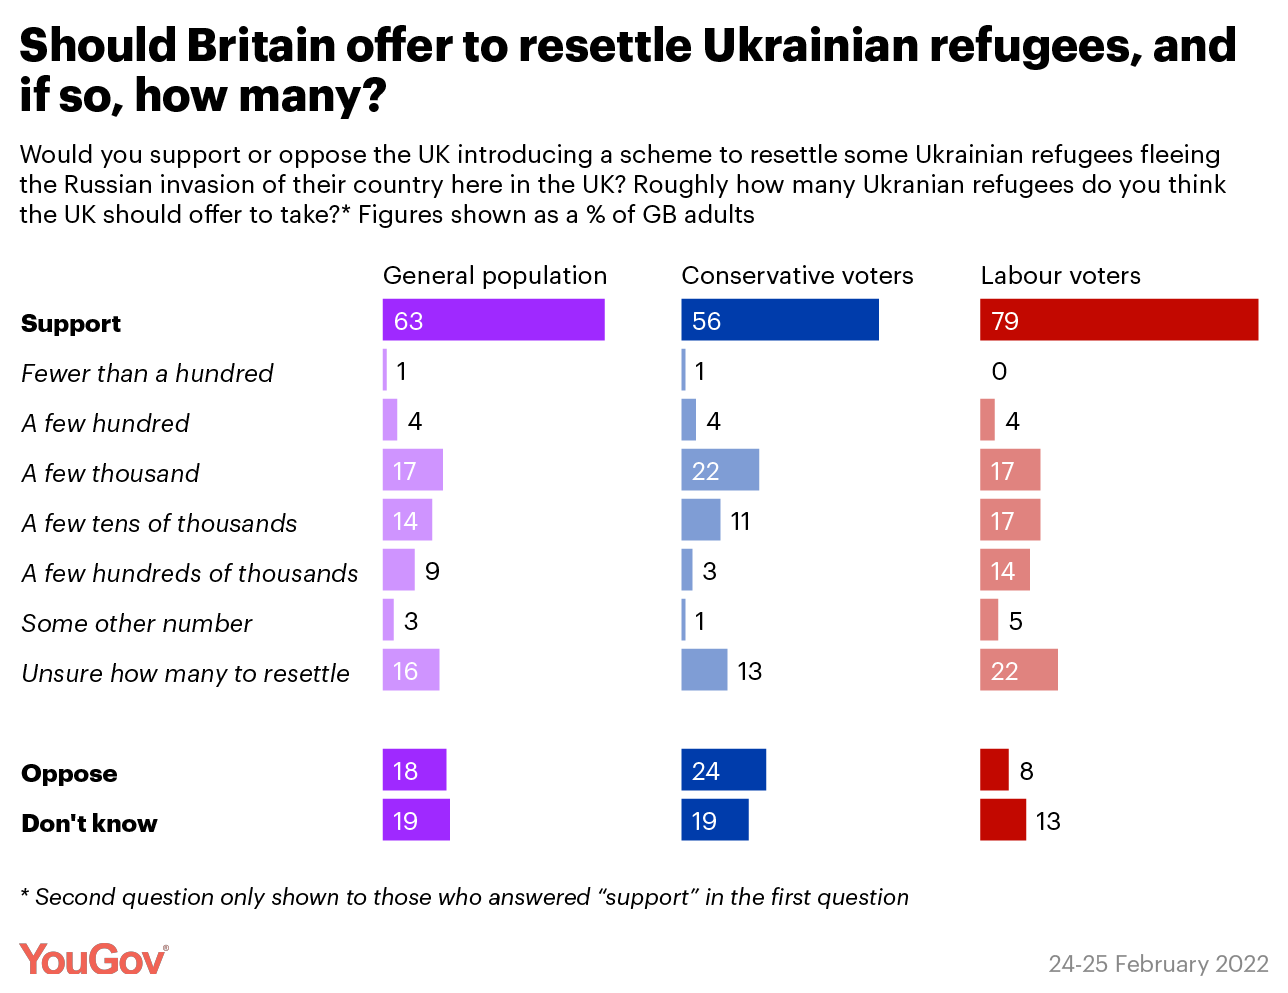 The results of YouGov polling carried out after Russia’s invasion of Ukraine